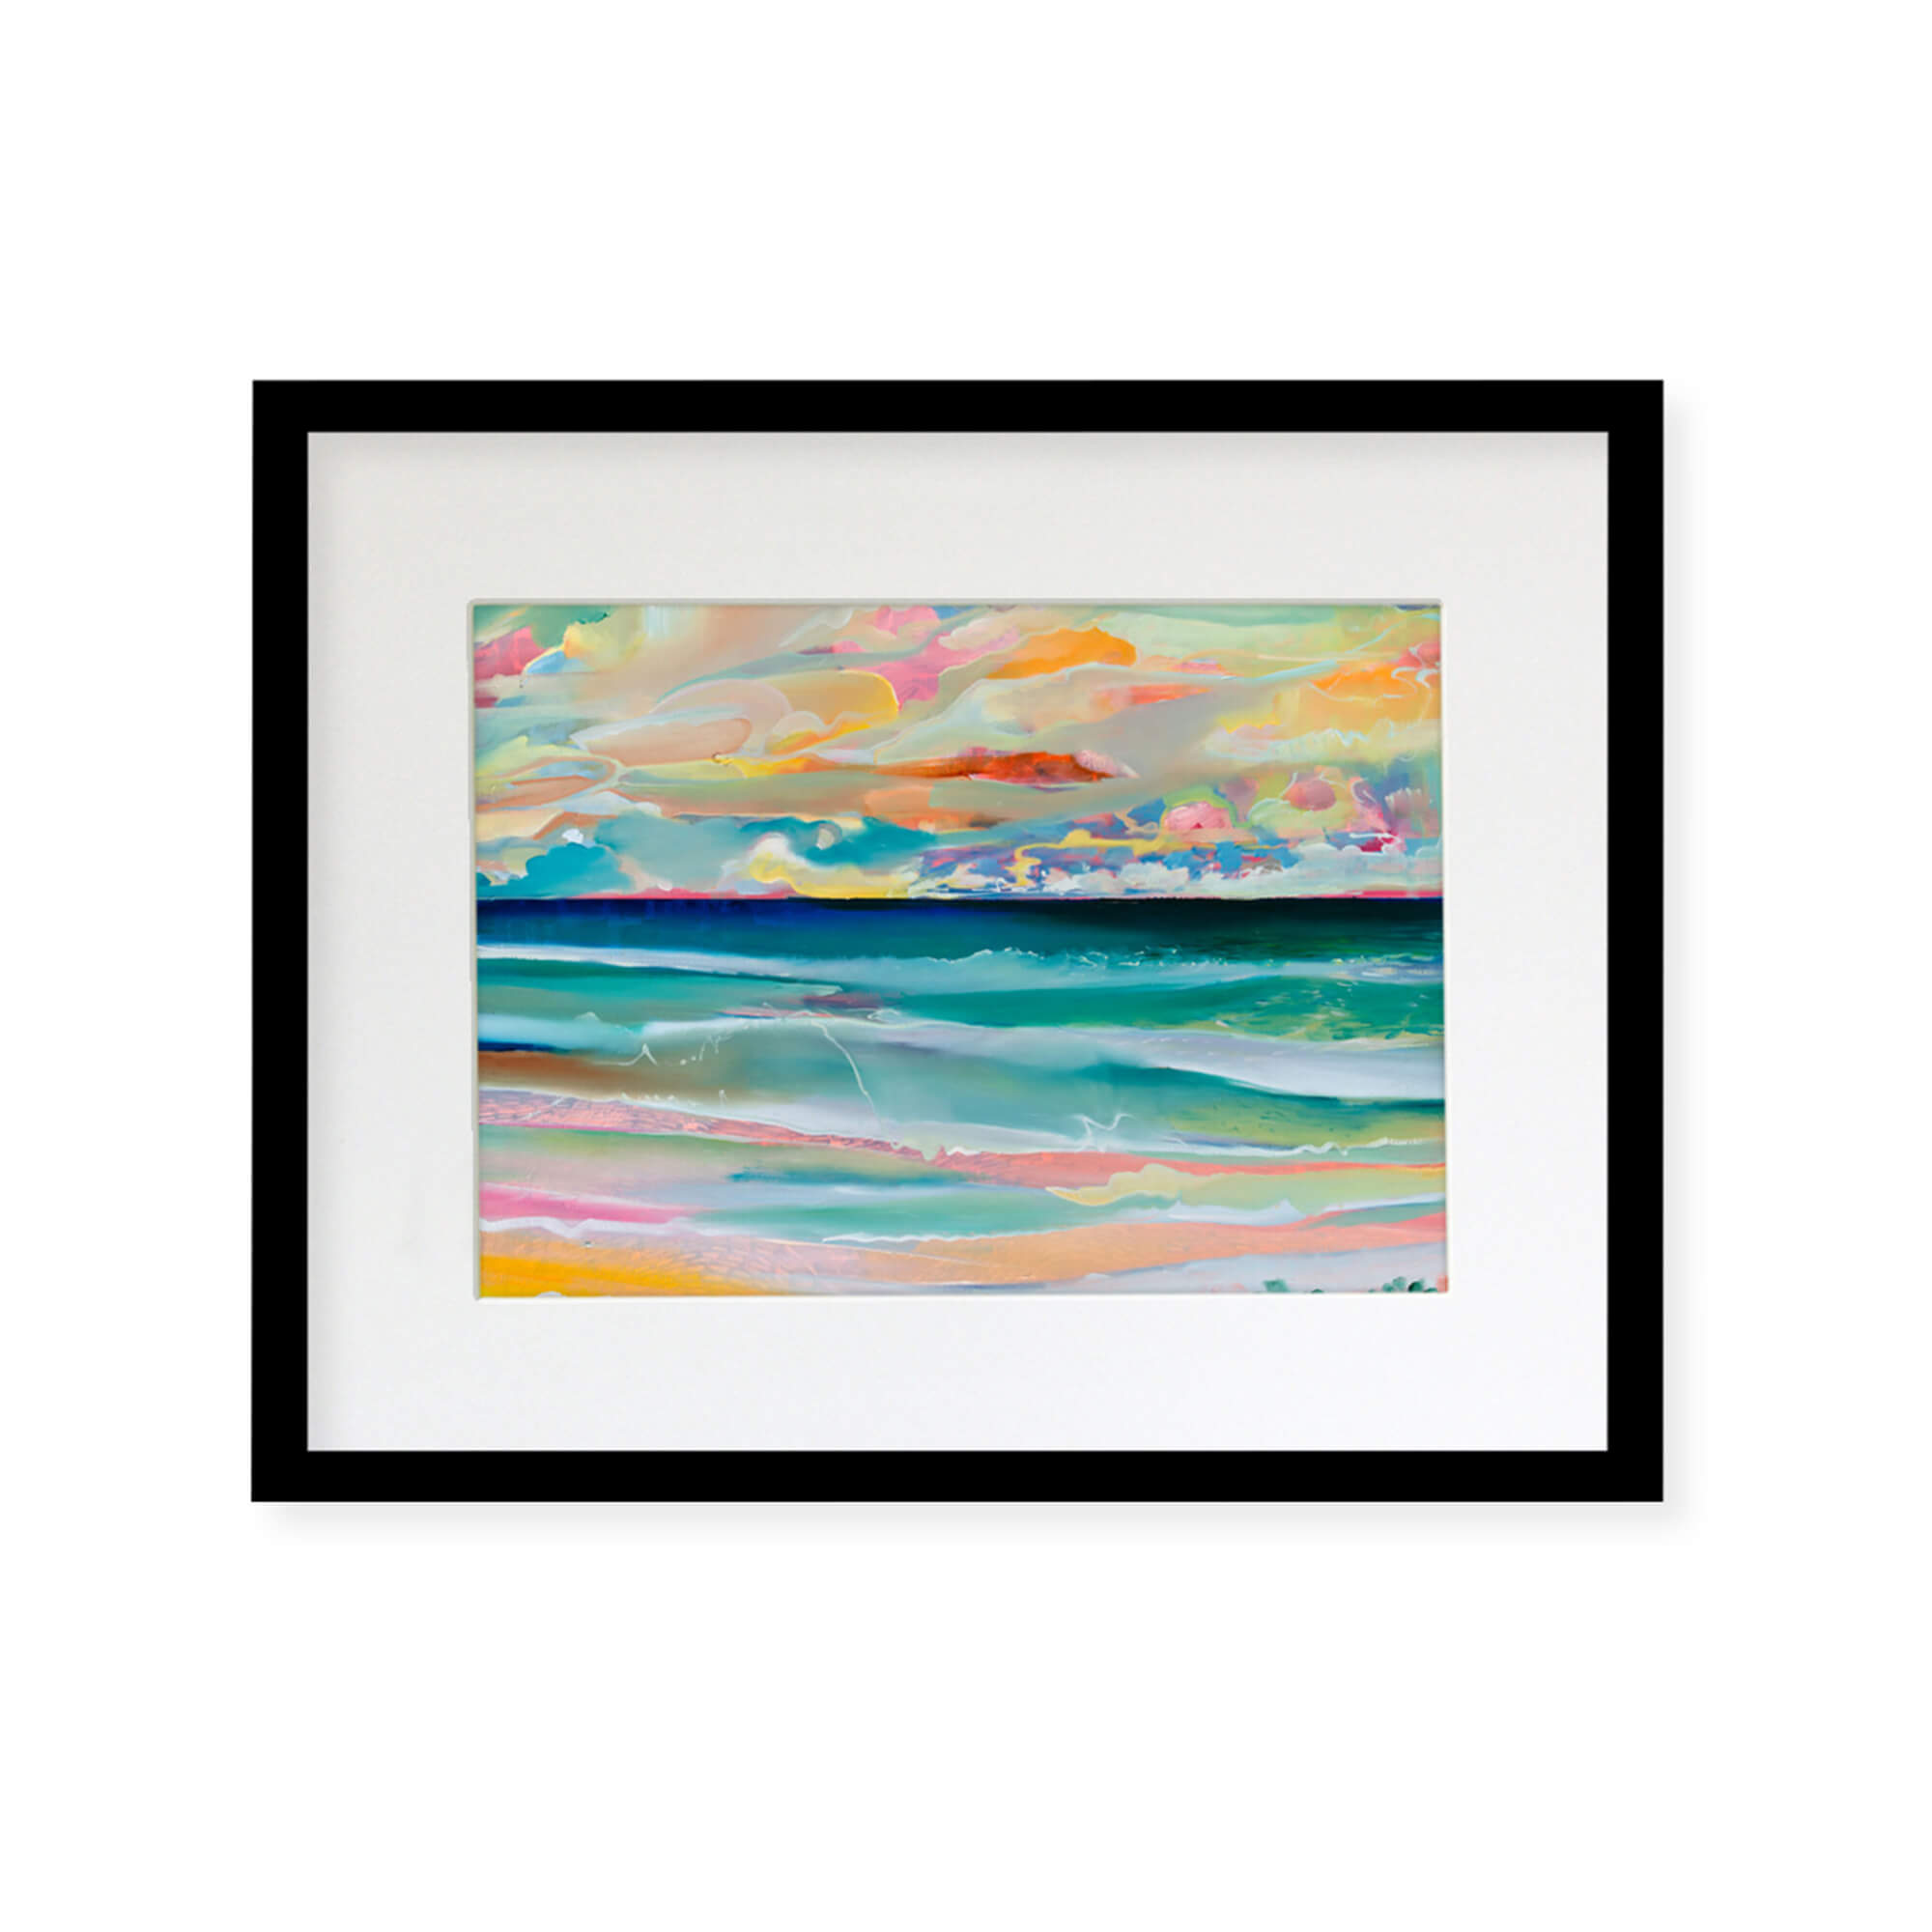 Framed matted art print of an abstract artwork of a seascape with pink, yellow and teal hues by Hawaii artist Saumolia Puapuaga 